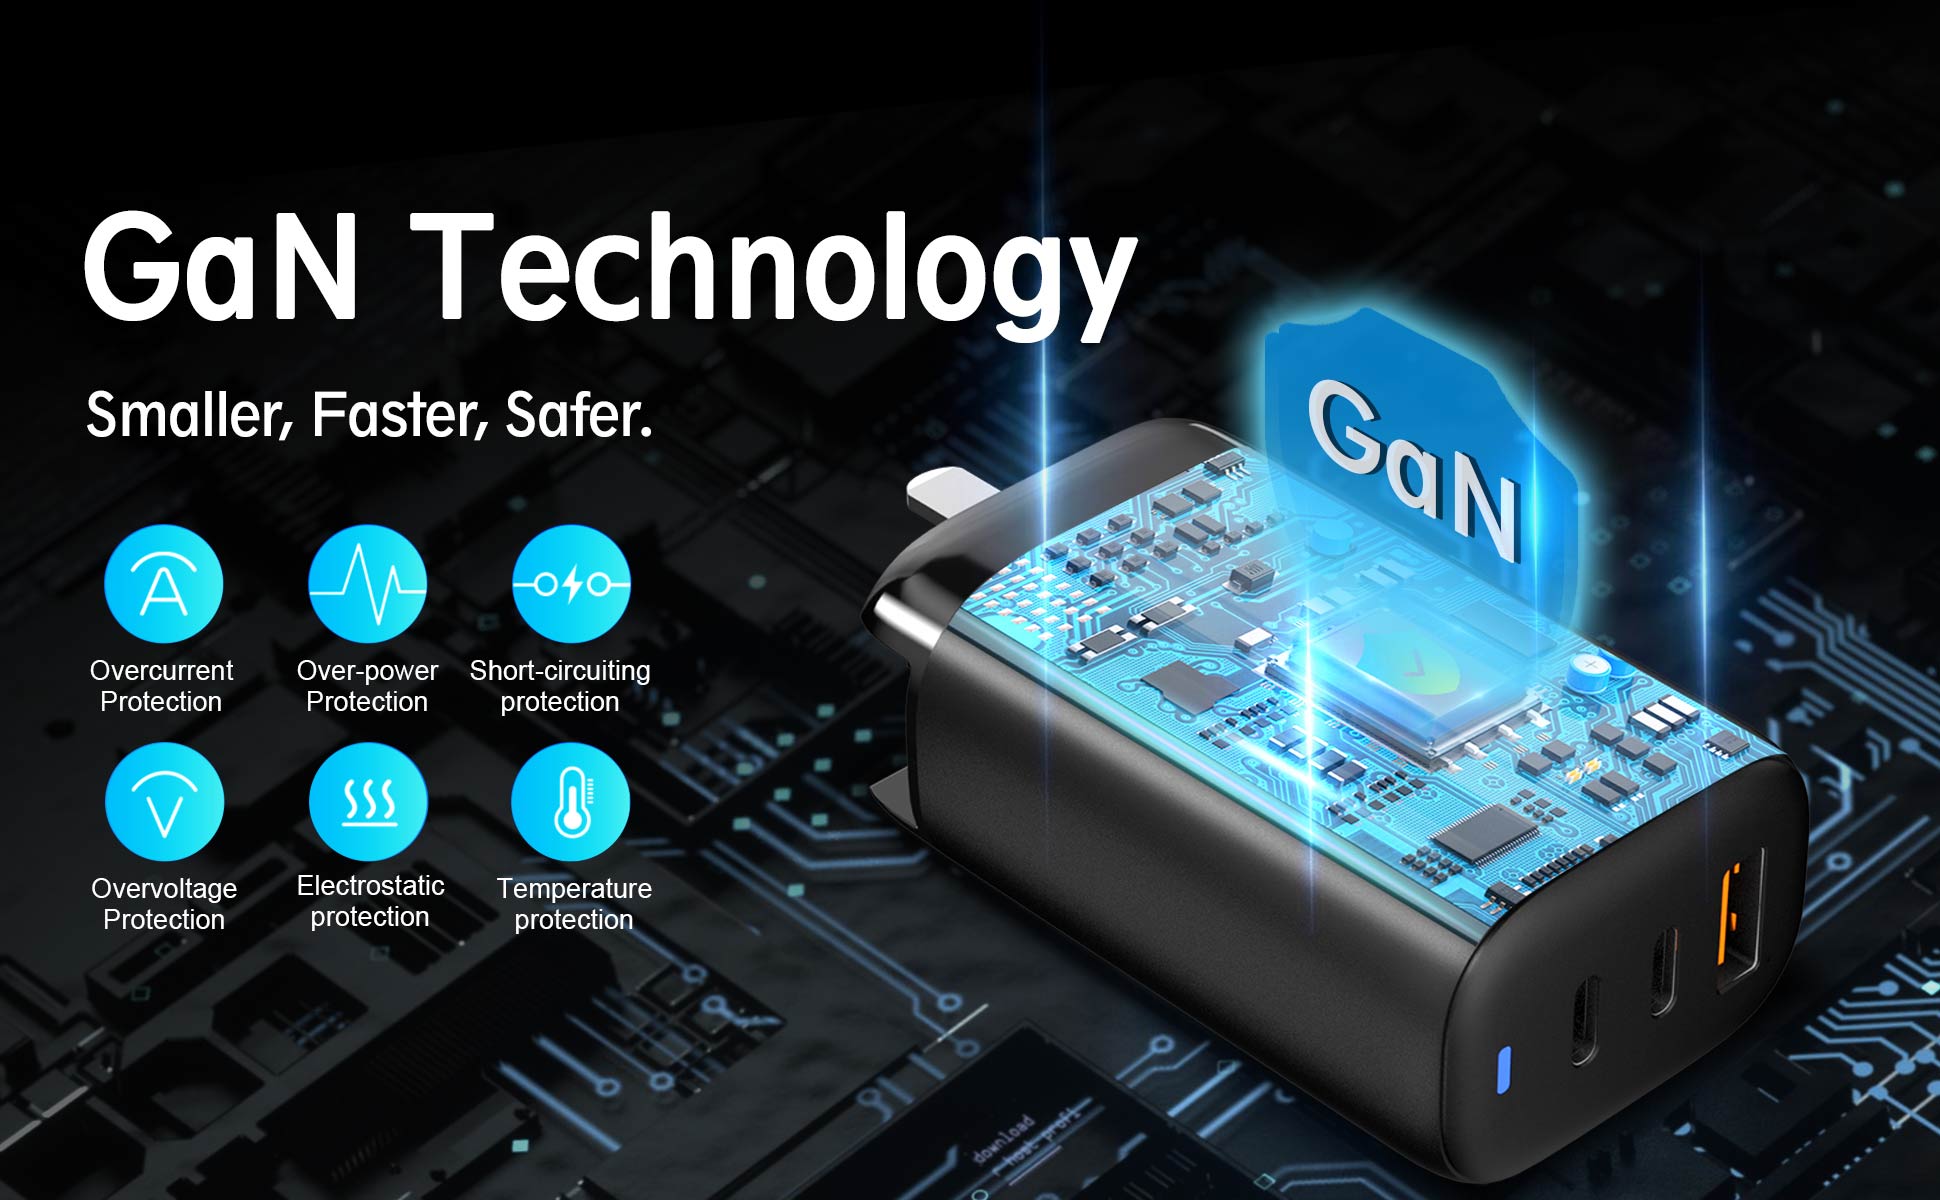 GaN-technology-makes-charging-safer-and-less-heat-protect-your-macbook-ipad-iphone